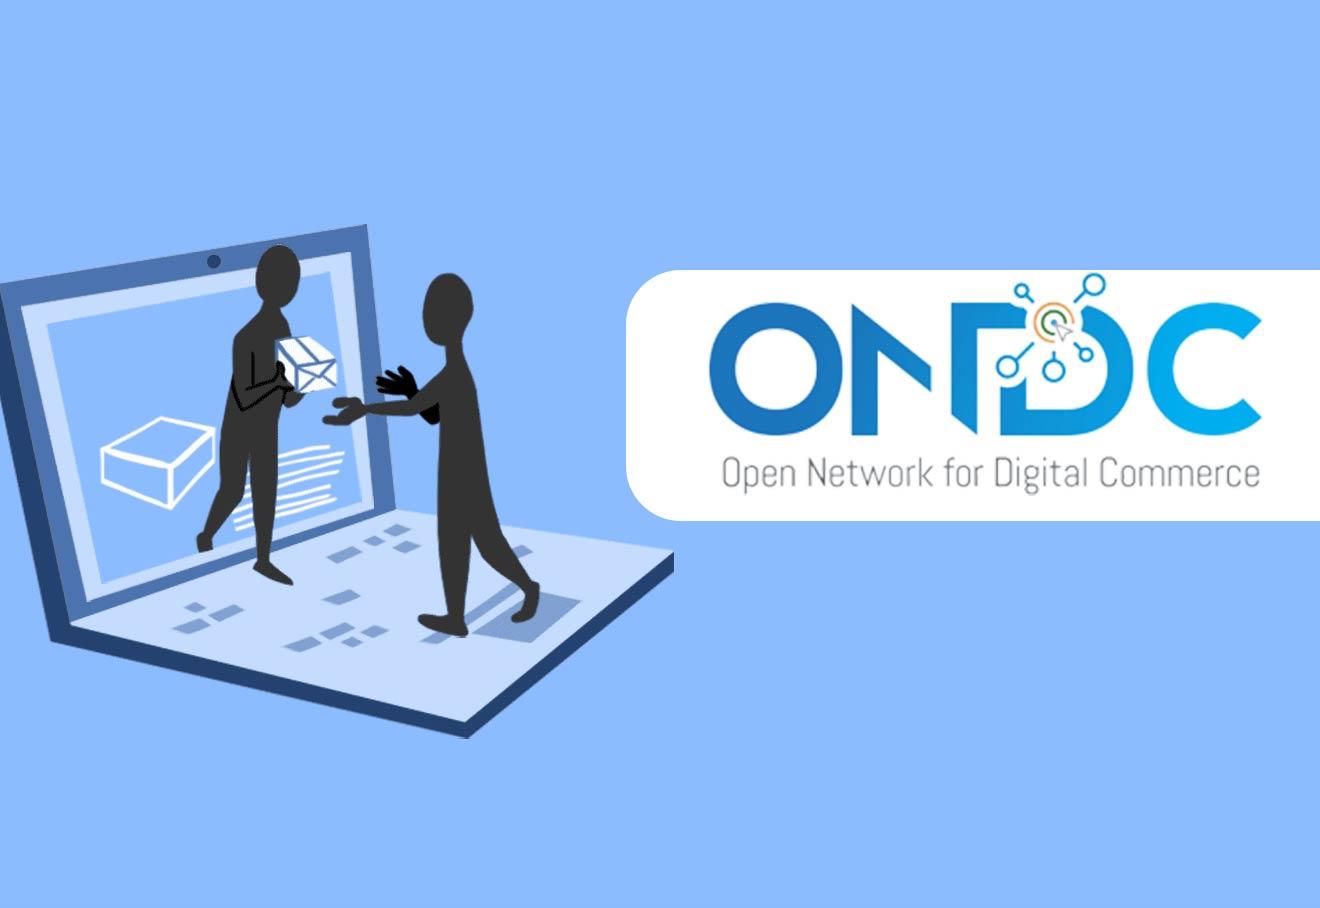 Ondc's Daily Transactions Likely To Touch 100,000 By January 2024